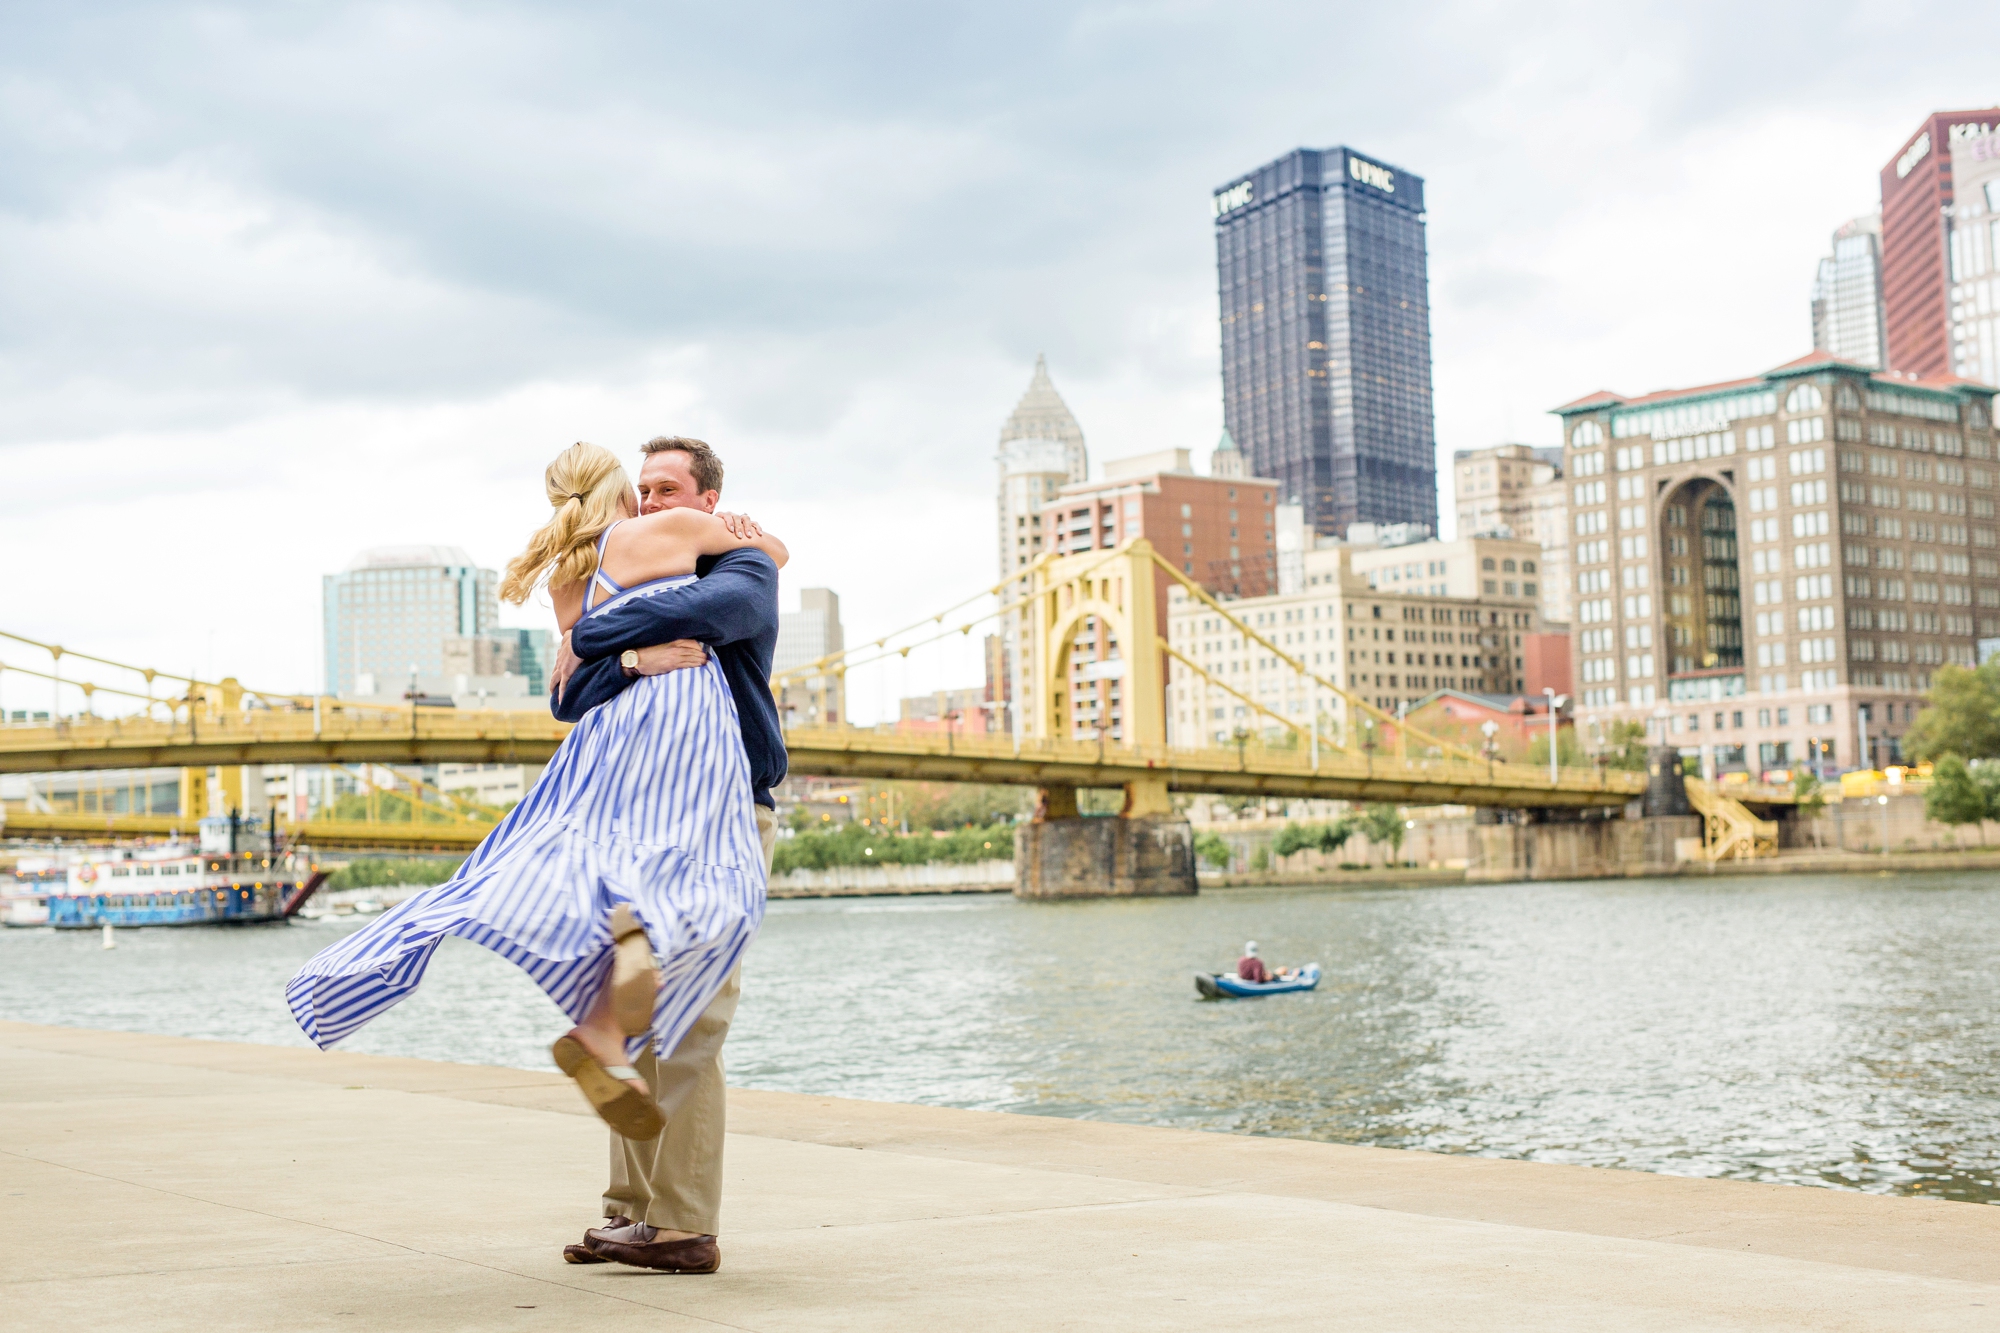 north shore engagement photos, north side engagement photos, allegheny commons park engagement photos, roberto clemente bridge engagement photos